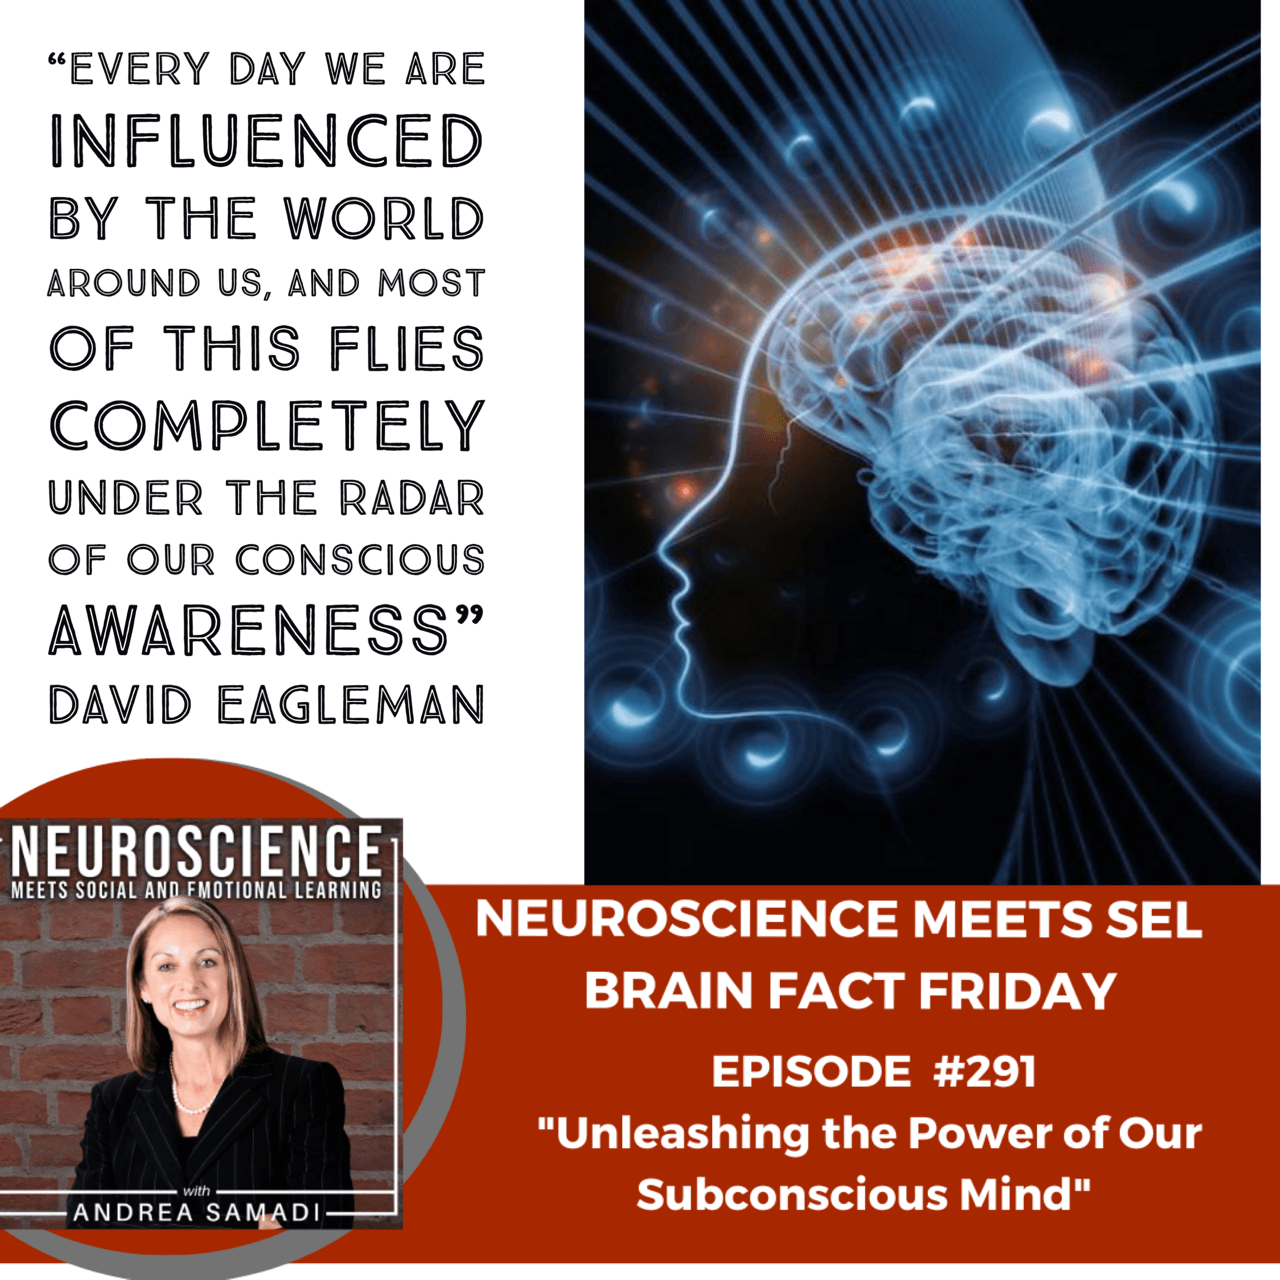 Brain Fact Friday on ”Unleashing the Power of Our Subconscious Mind”